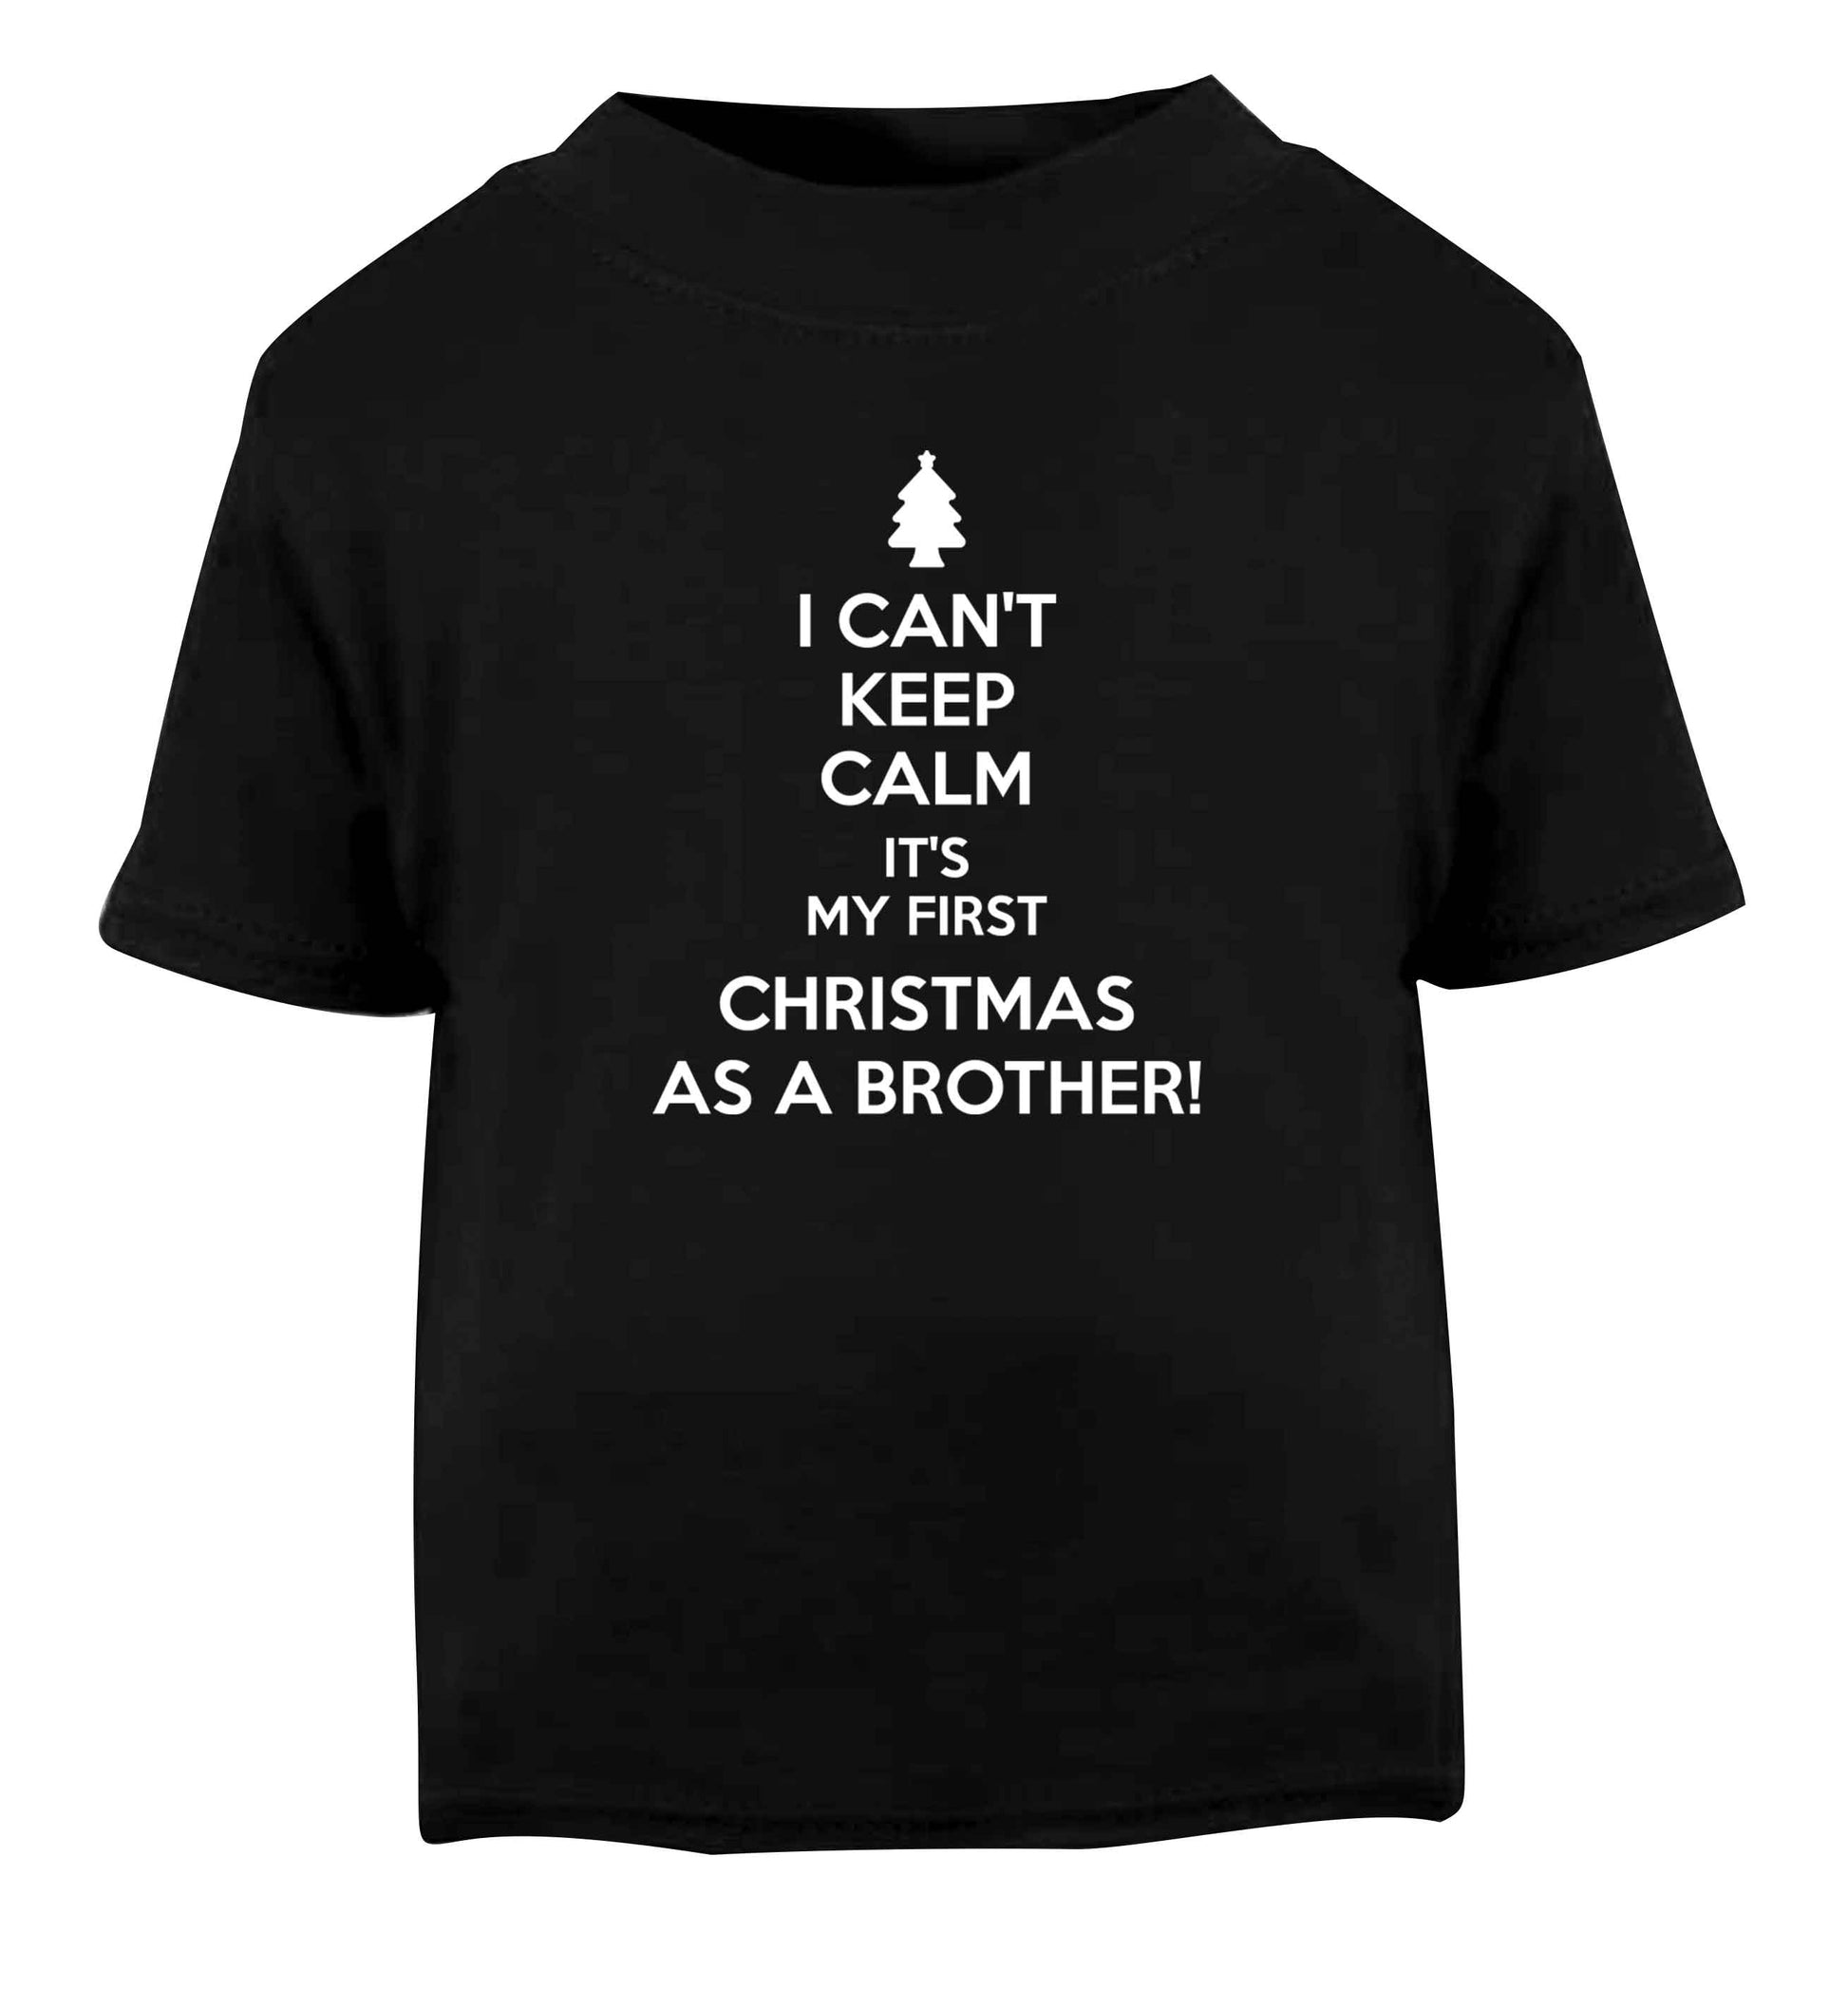 I can't keep calm it's my first Christmas as a brother! Black Baby Toddler Tshirt 2 years